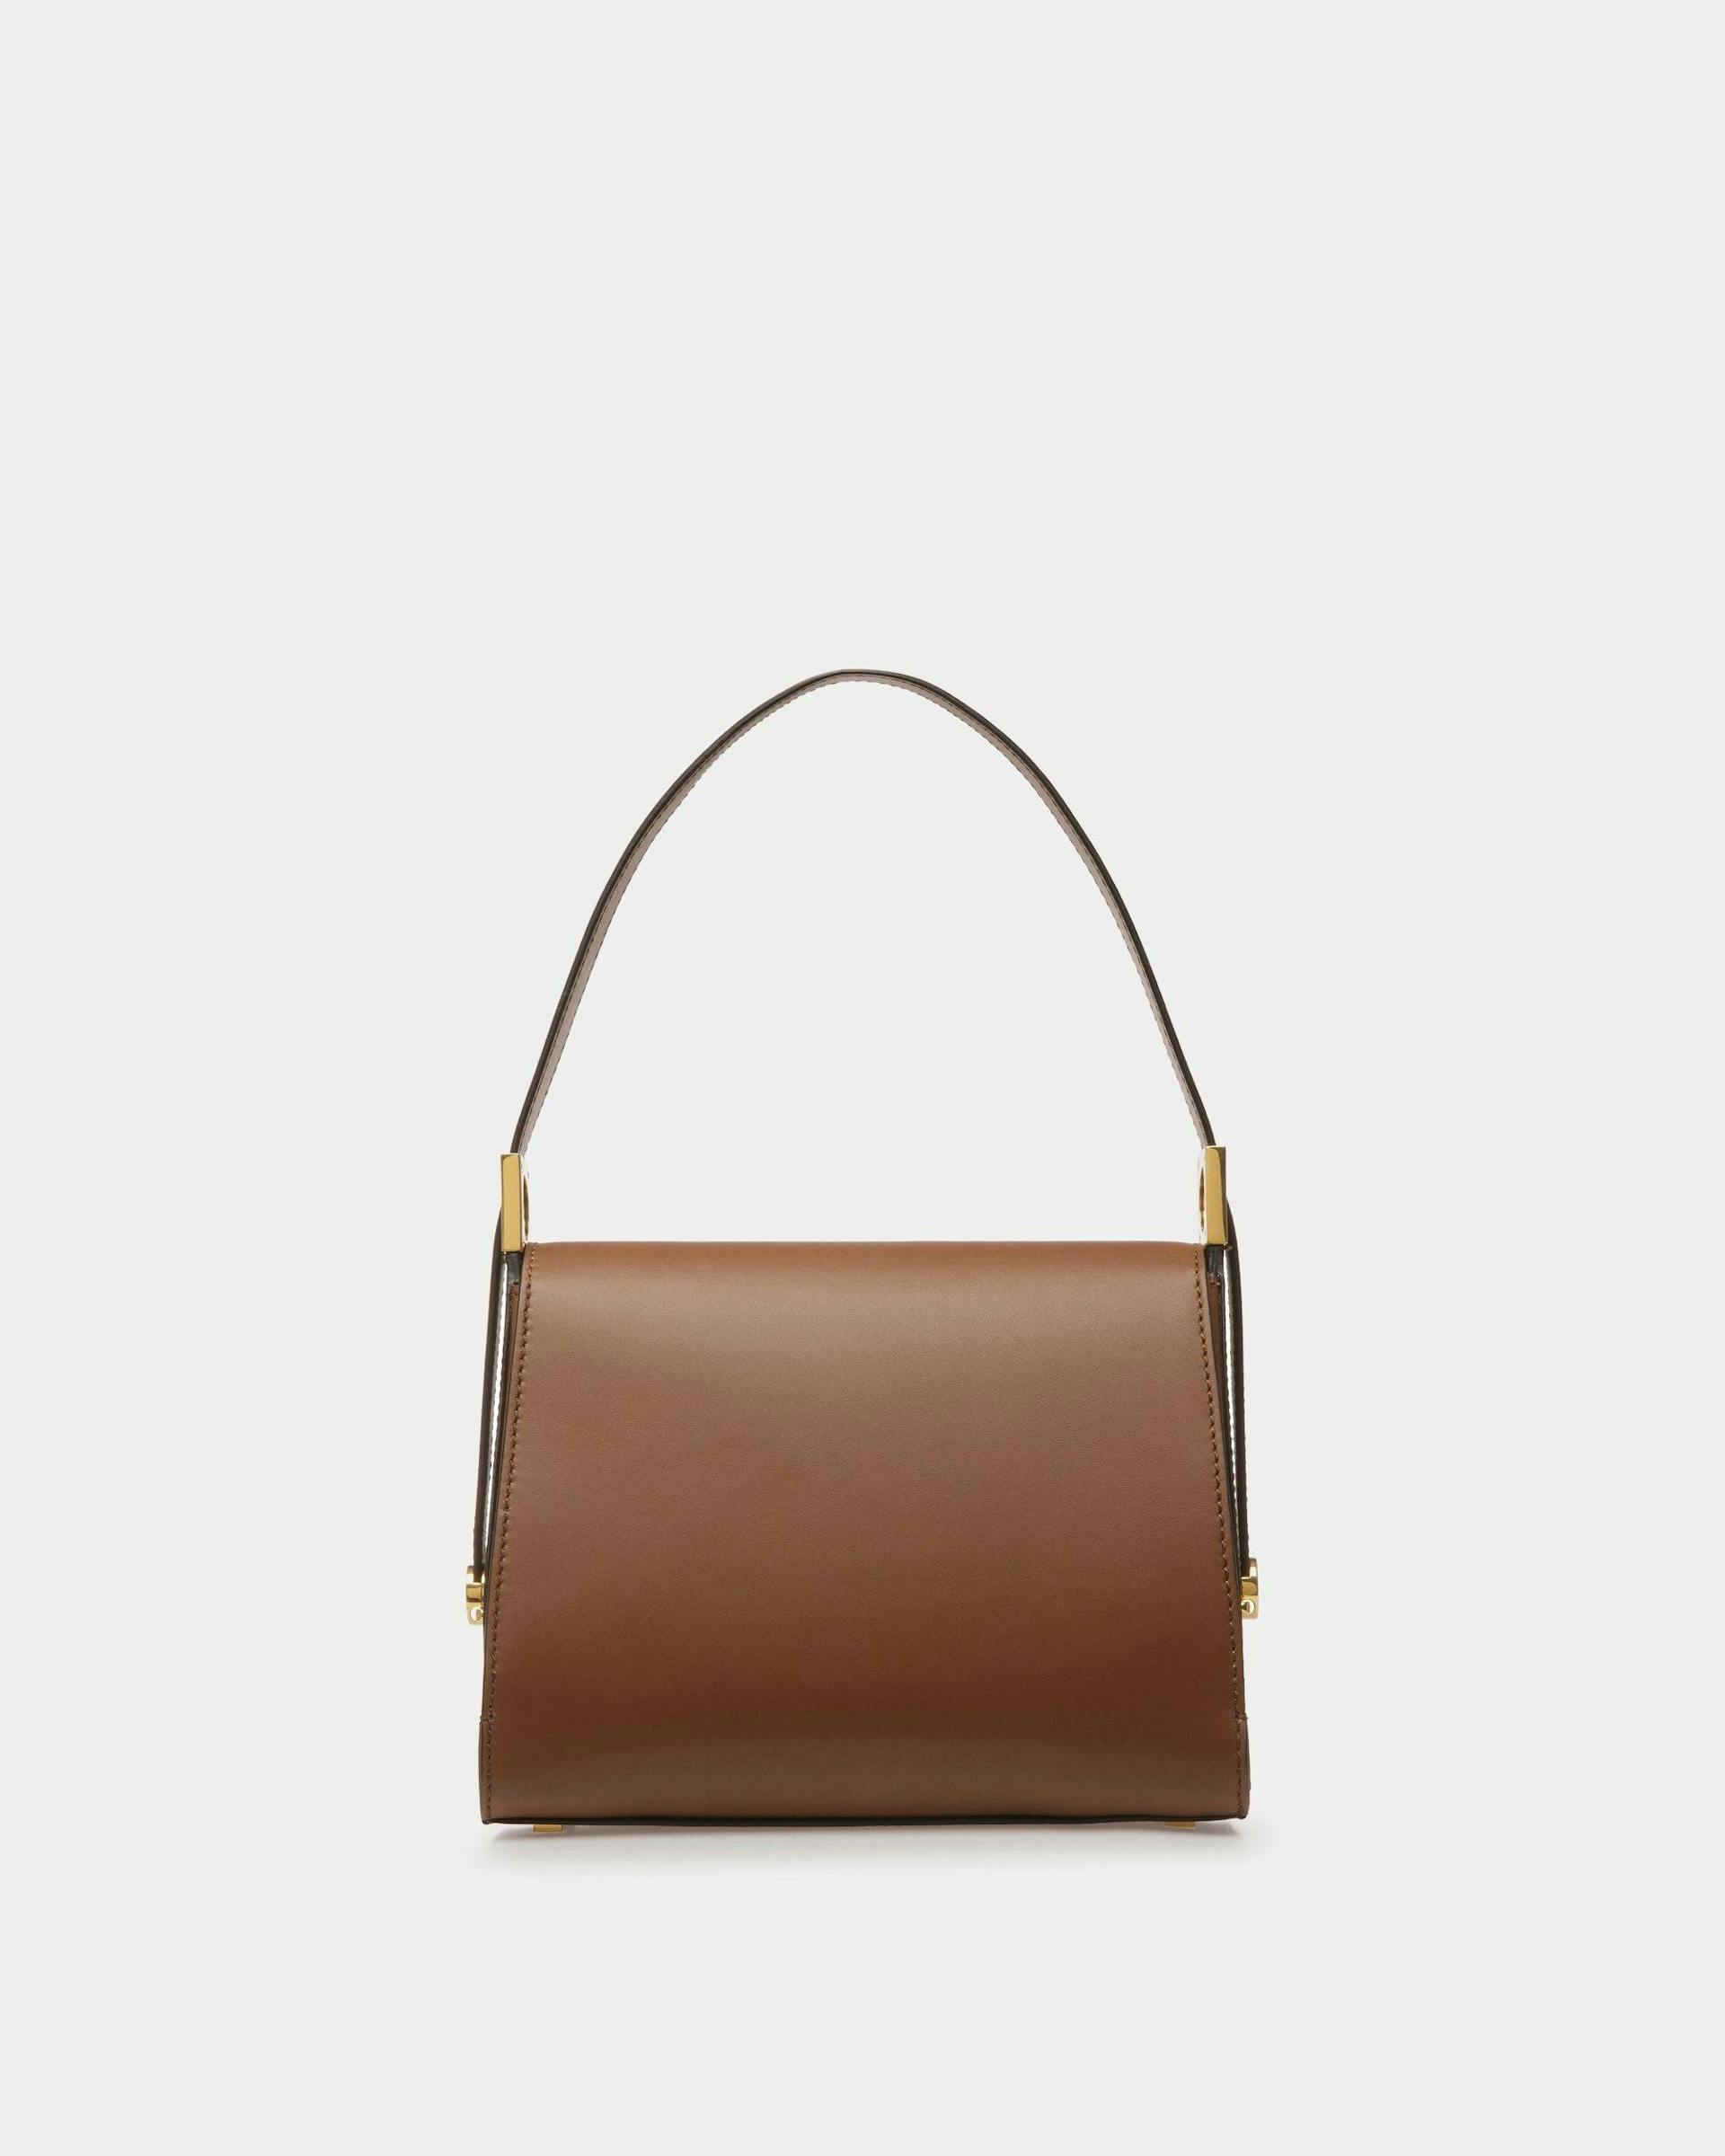 Women's Emblem Top Handle Bag In Brown Leather | Bally | Still Life Back